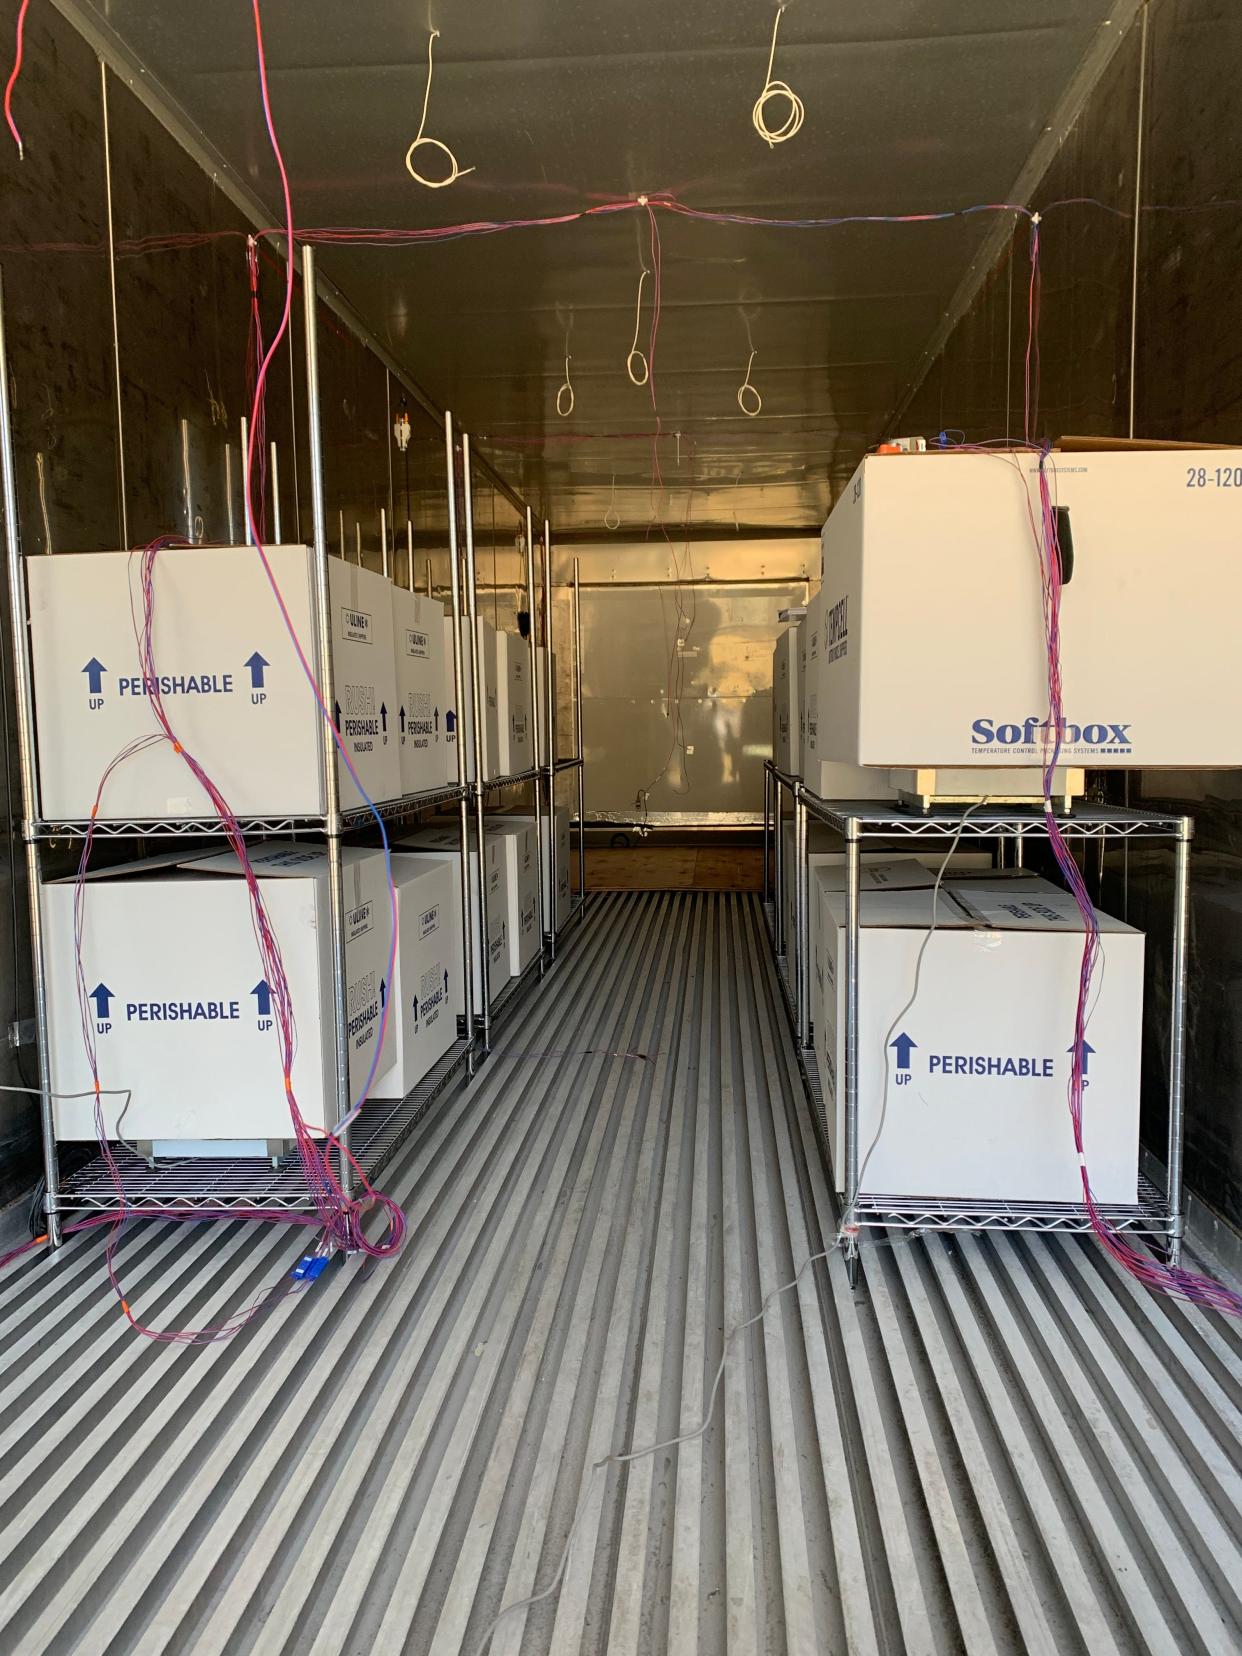 Oak Ridge National Laboratory researchers proved that COVID-19 vaccines can be kept ultra-cool for an extended period in a retrofitted commercial storage container, shown here on the inside, providing a resource for safe delivery to remote locations.